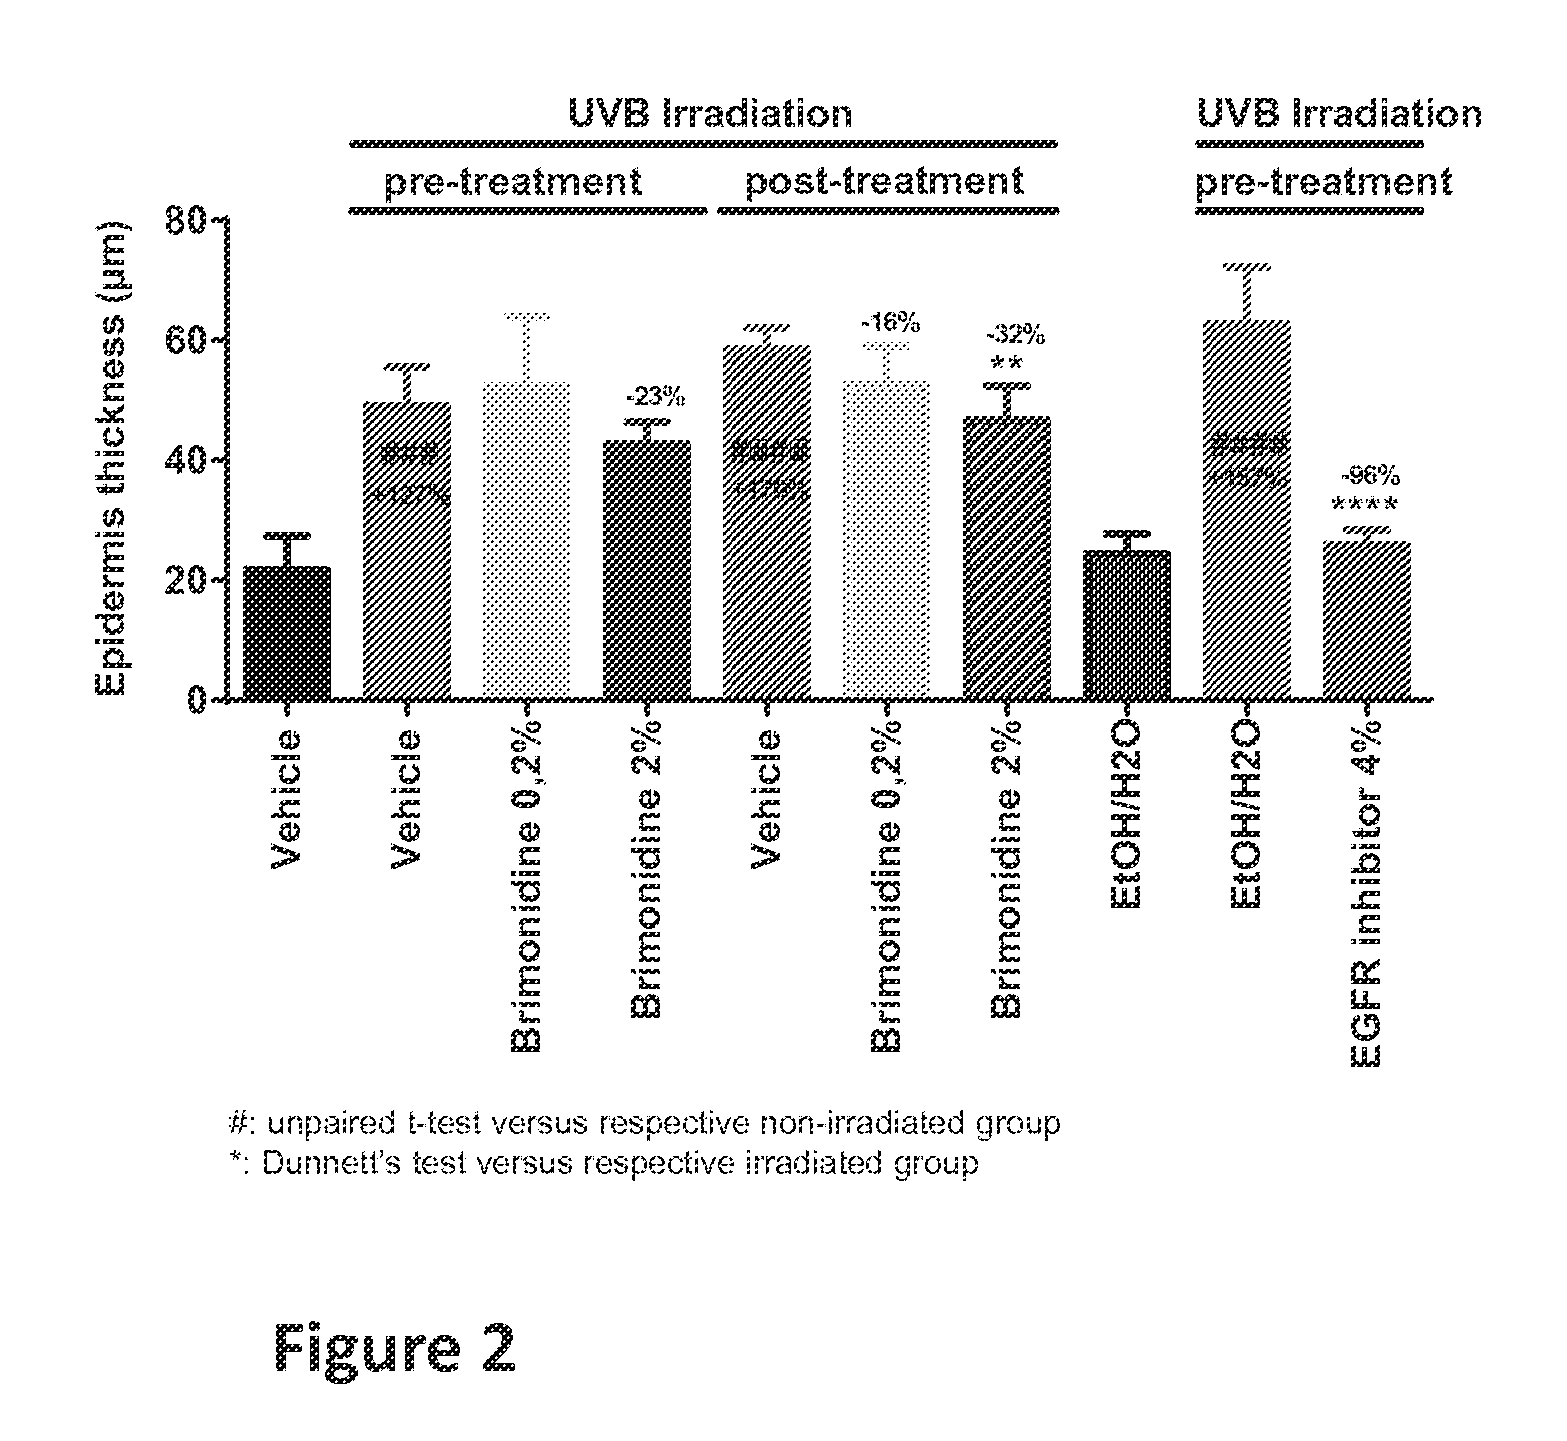 Method for treating cell proliferation disorders